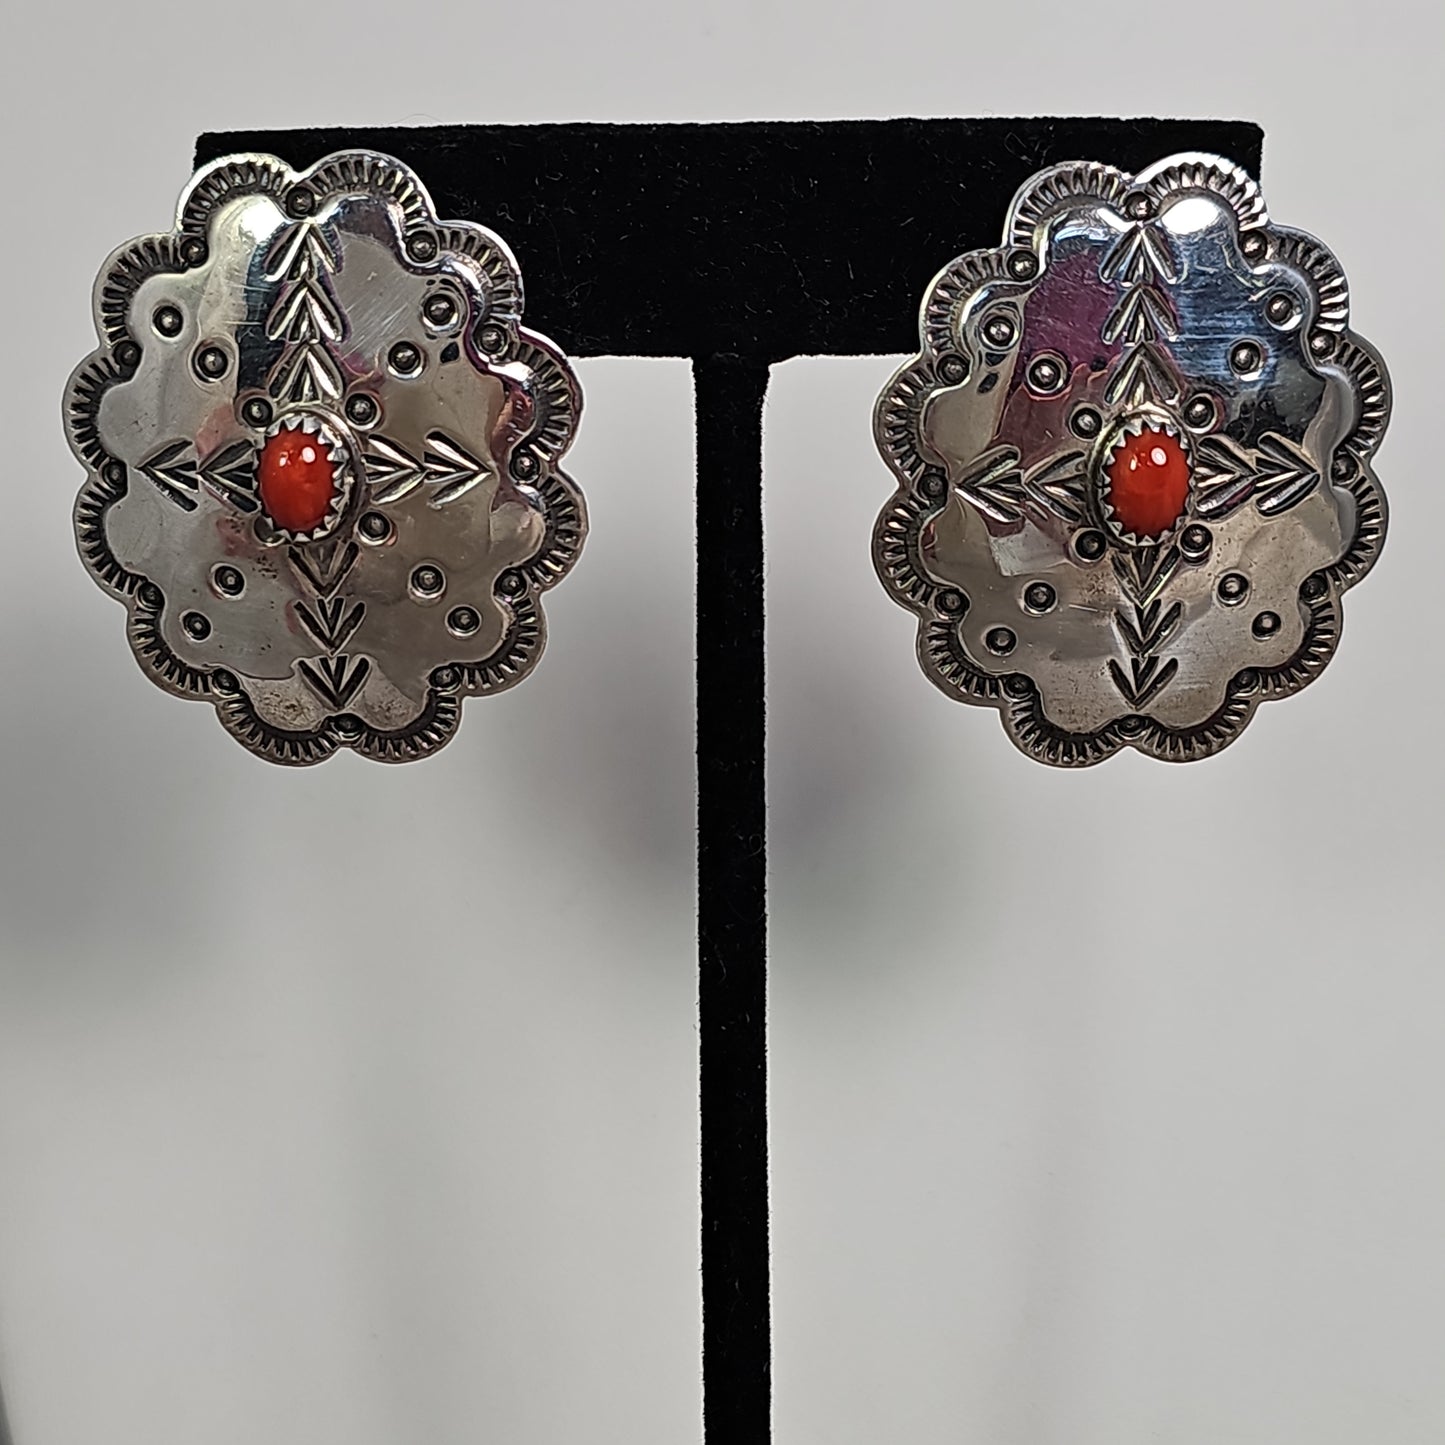 Coral concho earrings